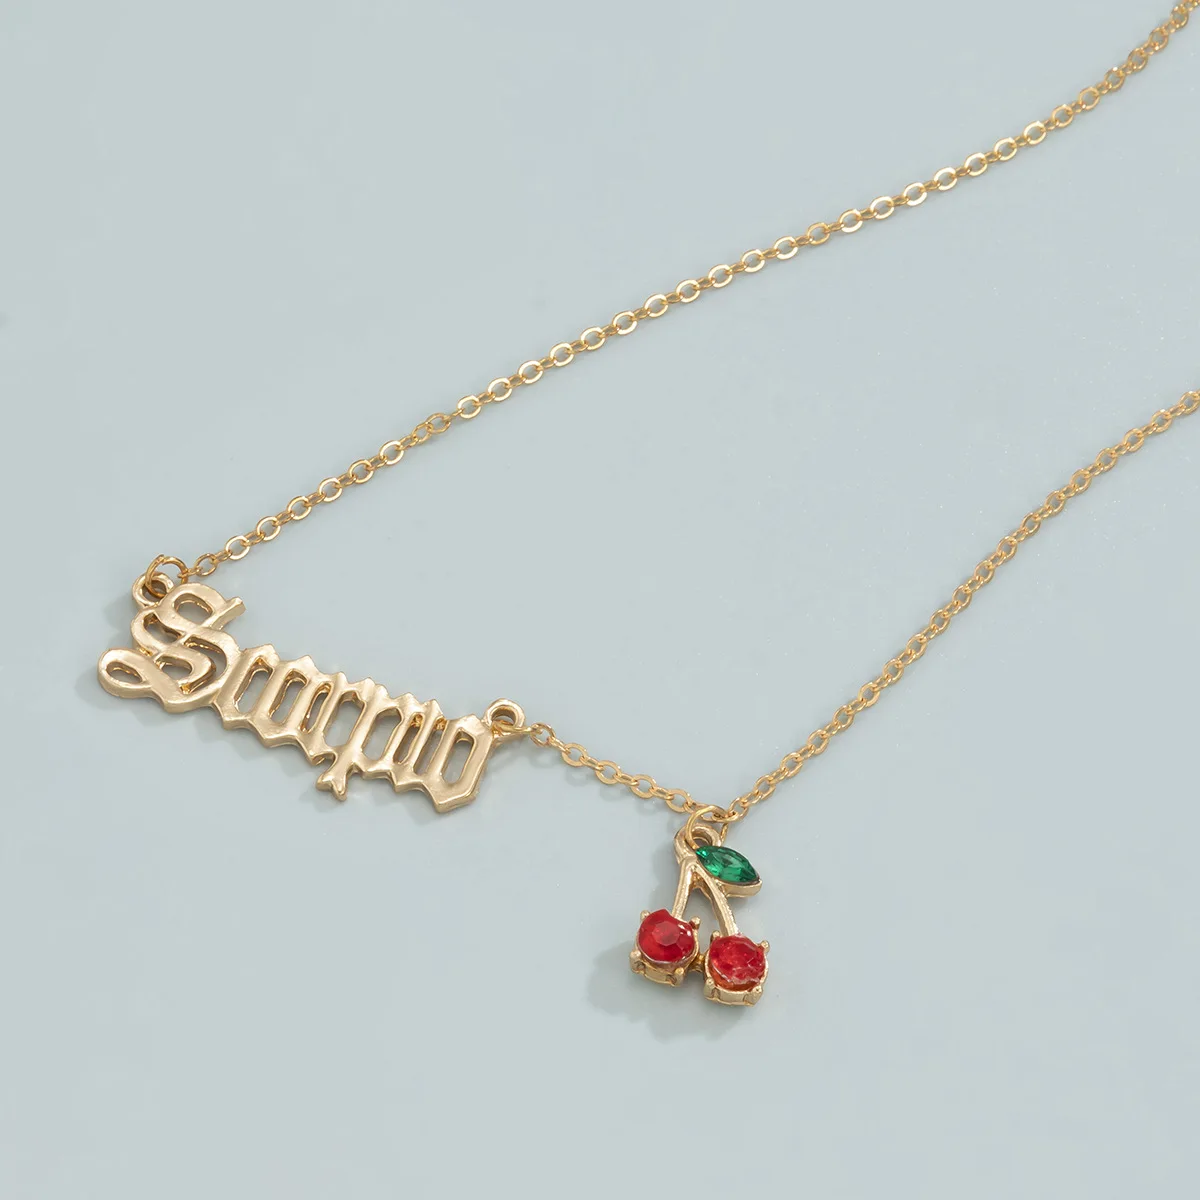 
WC-012 Simple Single Layer Metal Sexy Body Waist Chains Gold Plated Retro English Letter Cherry Pendant Belly Waist Chain 